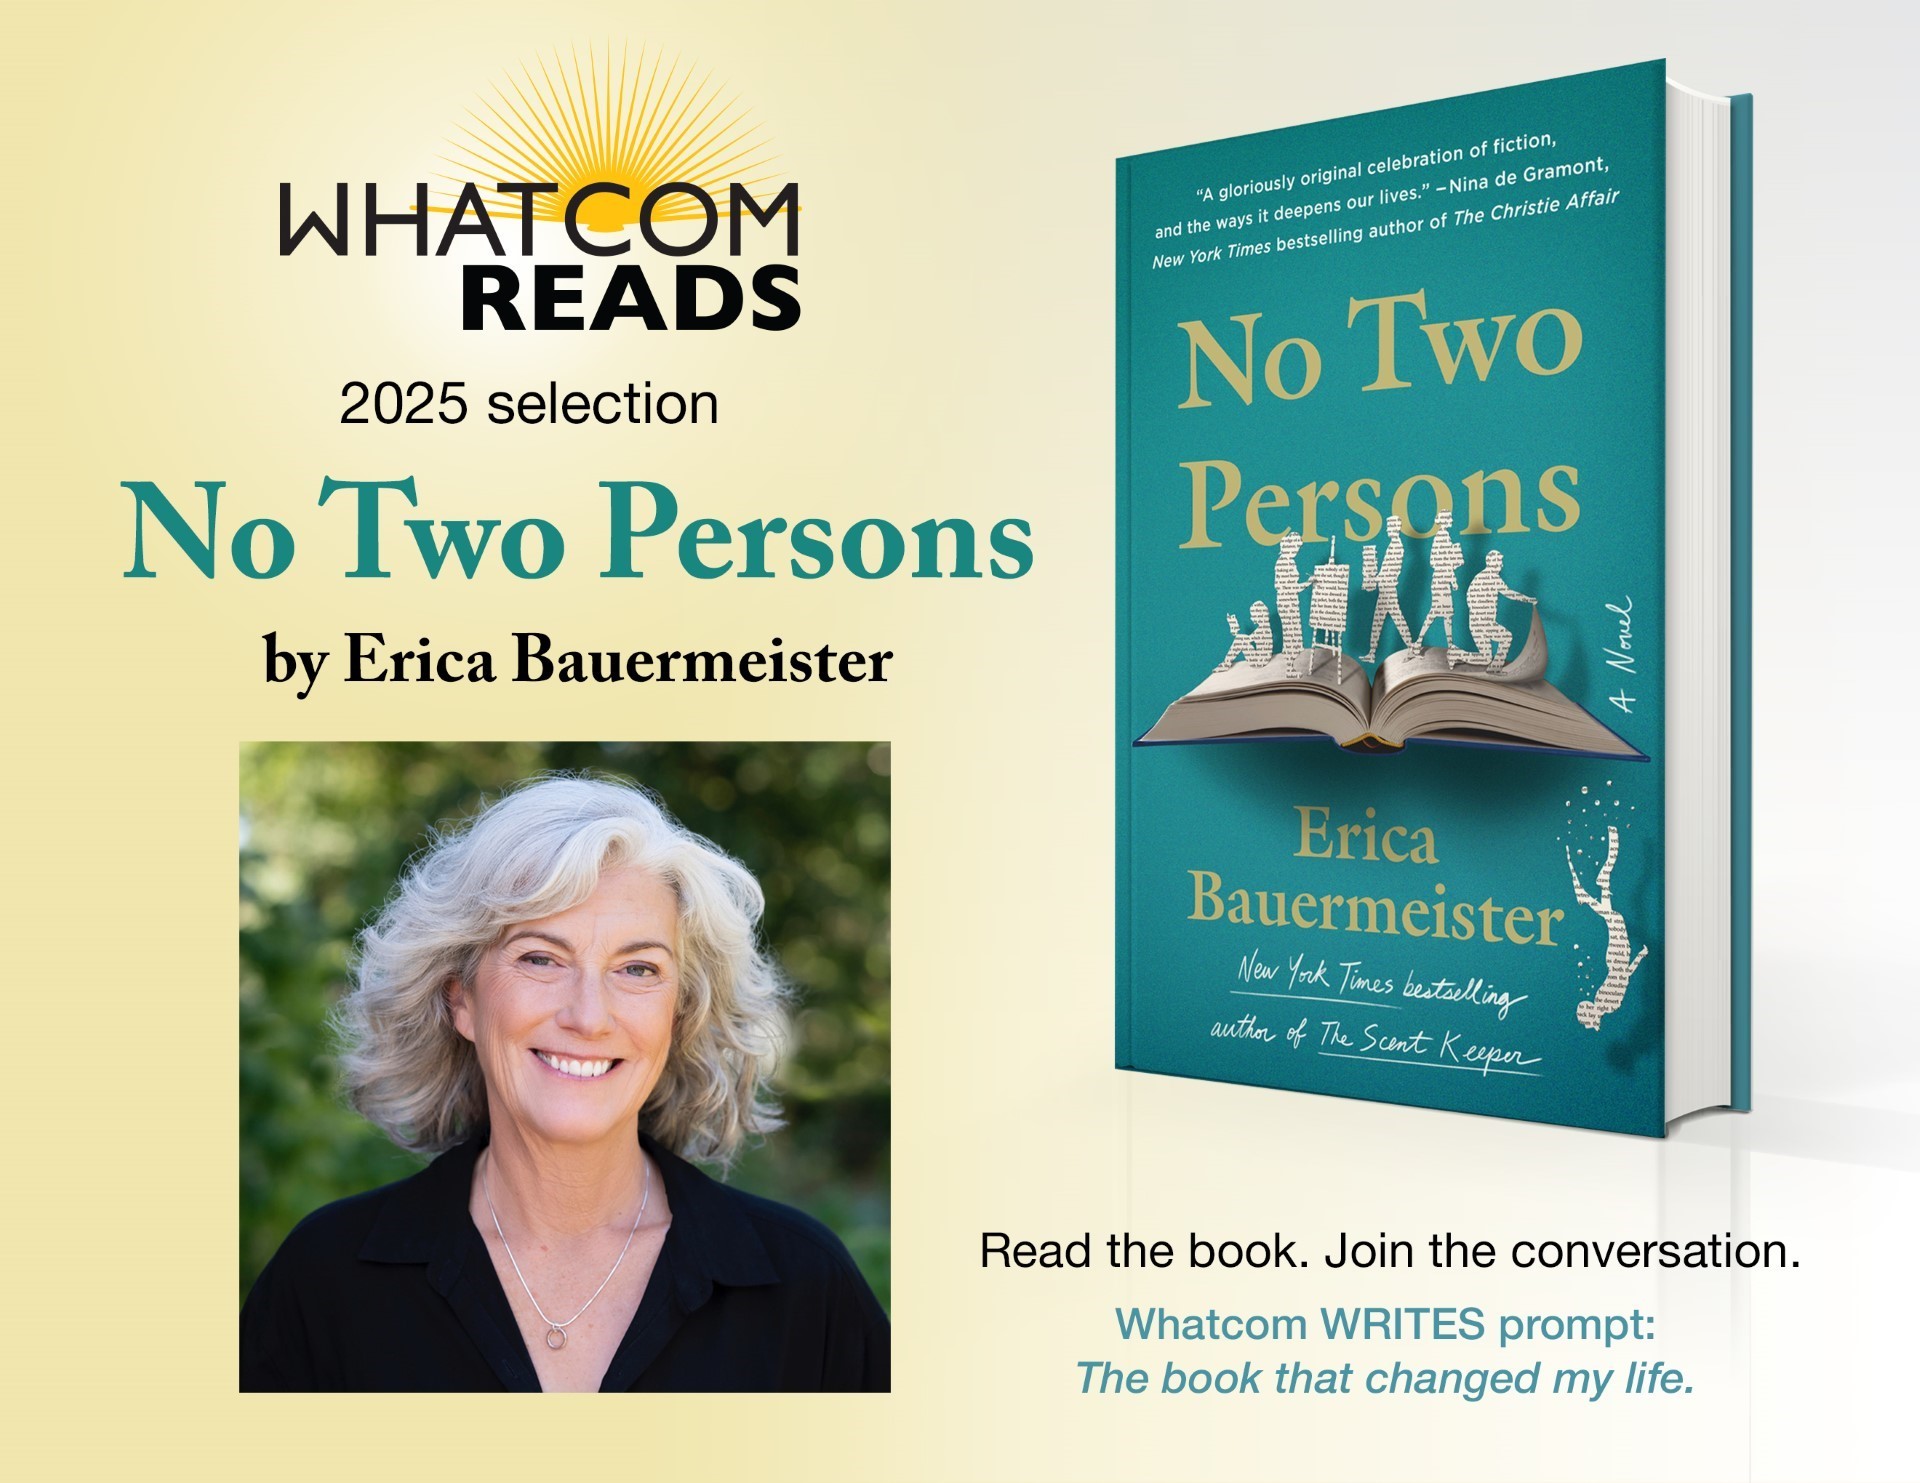 Whatcom READS 2025 selection: No Two Persons by Erica Bauermeister. Read the book. Join the conversation. Whatcom Writes prompt: The book that changed my life.